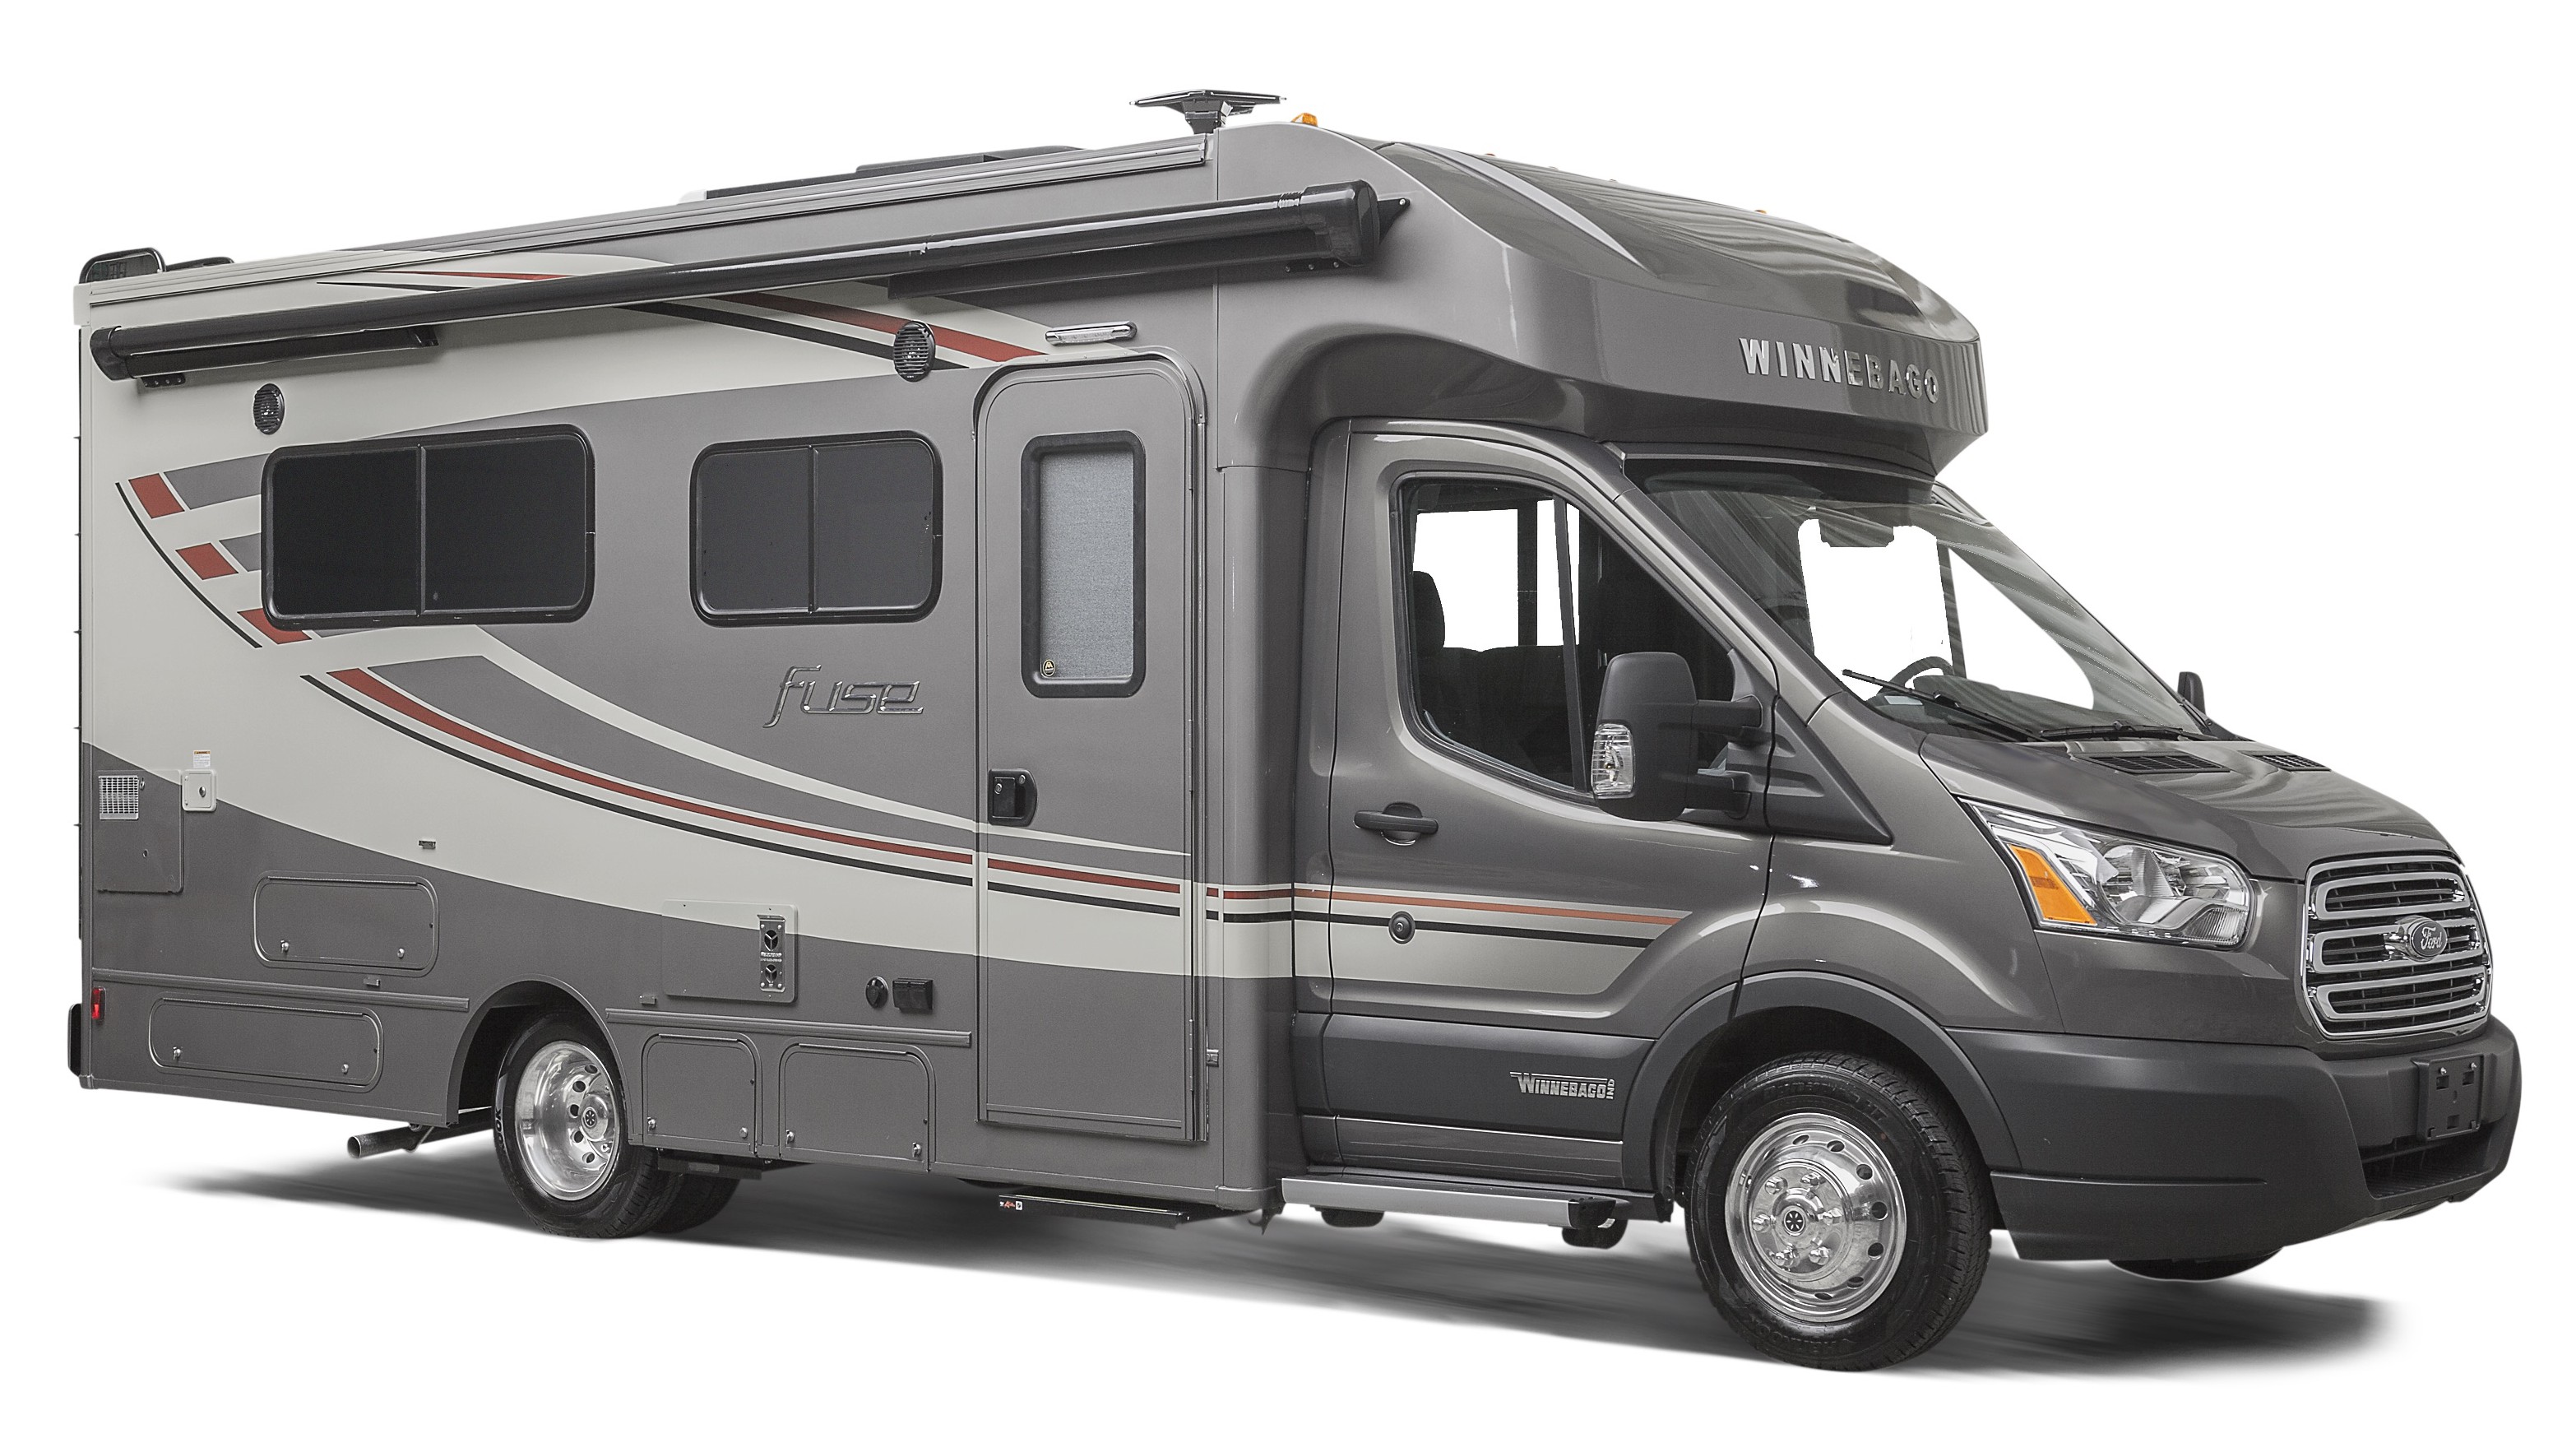 The Winnebago Fuse is one of the all-new motorhome models based on Ford Transit – America’s best-selling commercial van. Transit’s efficiency, comfortable ride and affordability make it a great choice as a motorhome for outdoor enthusiasts. Photo courtesy: Winnebago Industries